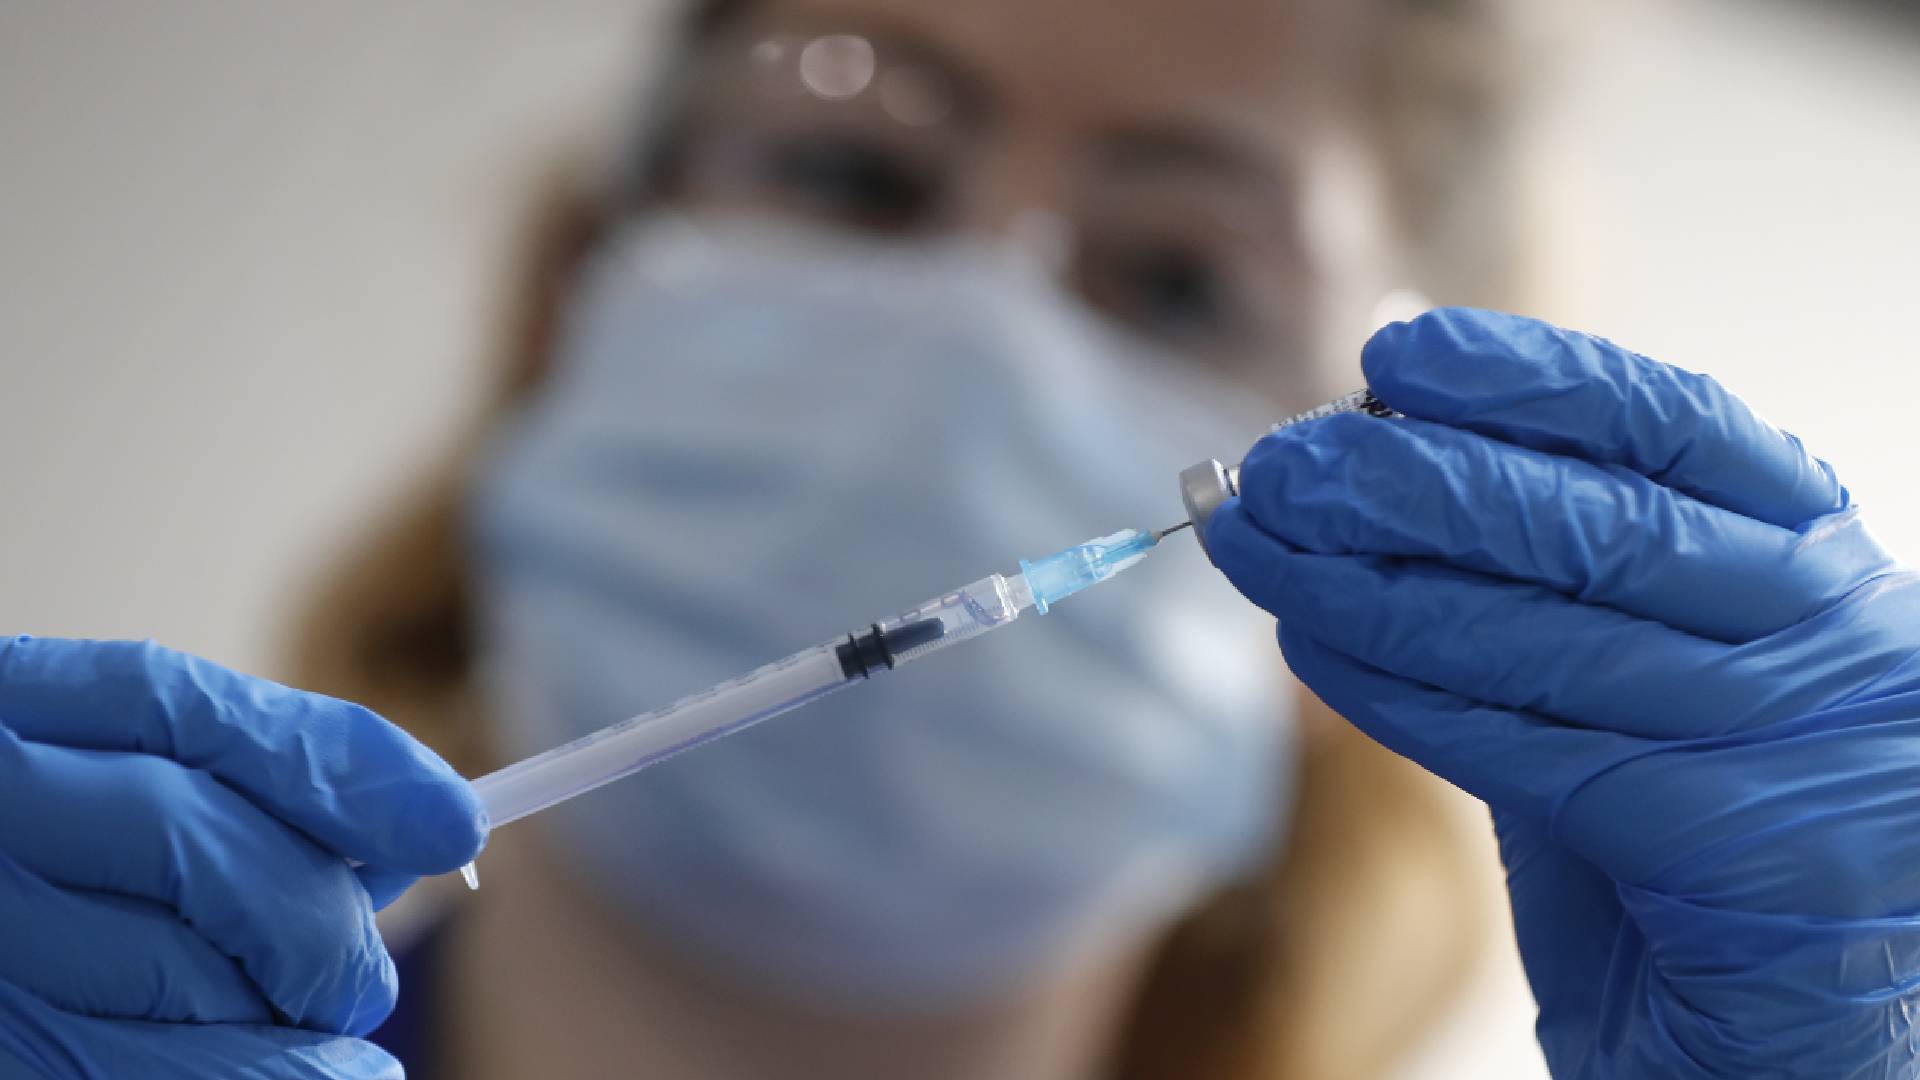 A nurse prepares a shot of the Pfizer-BioNTech COVID-19 vaccine at Guy's Hospital in London. (AP Photo/Frank Augstein, Pool)